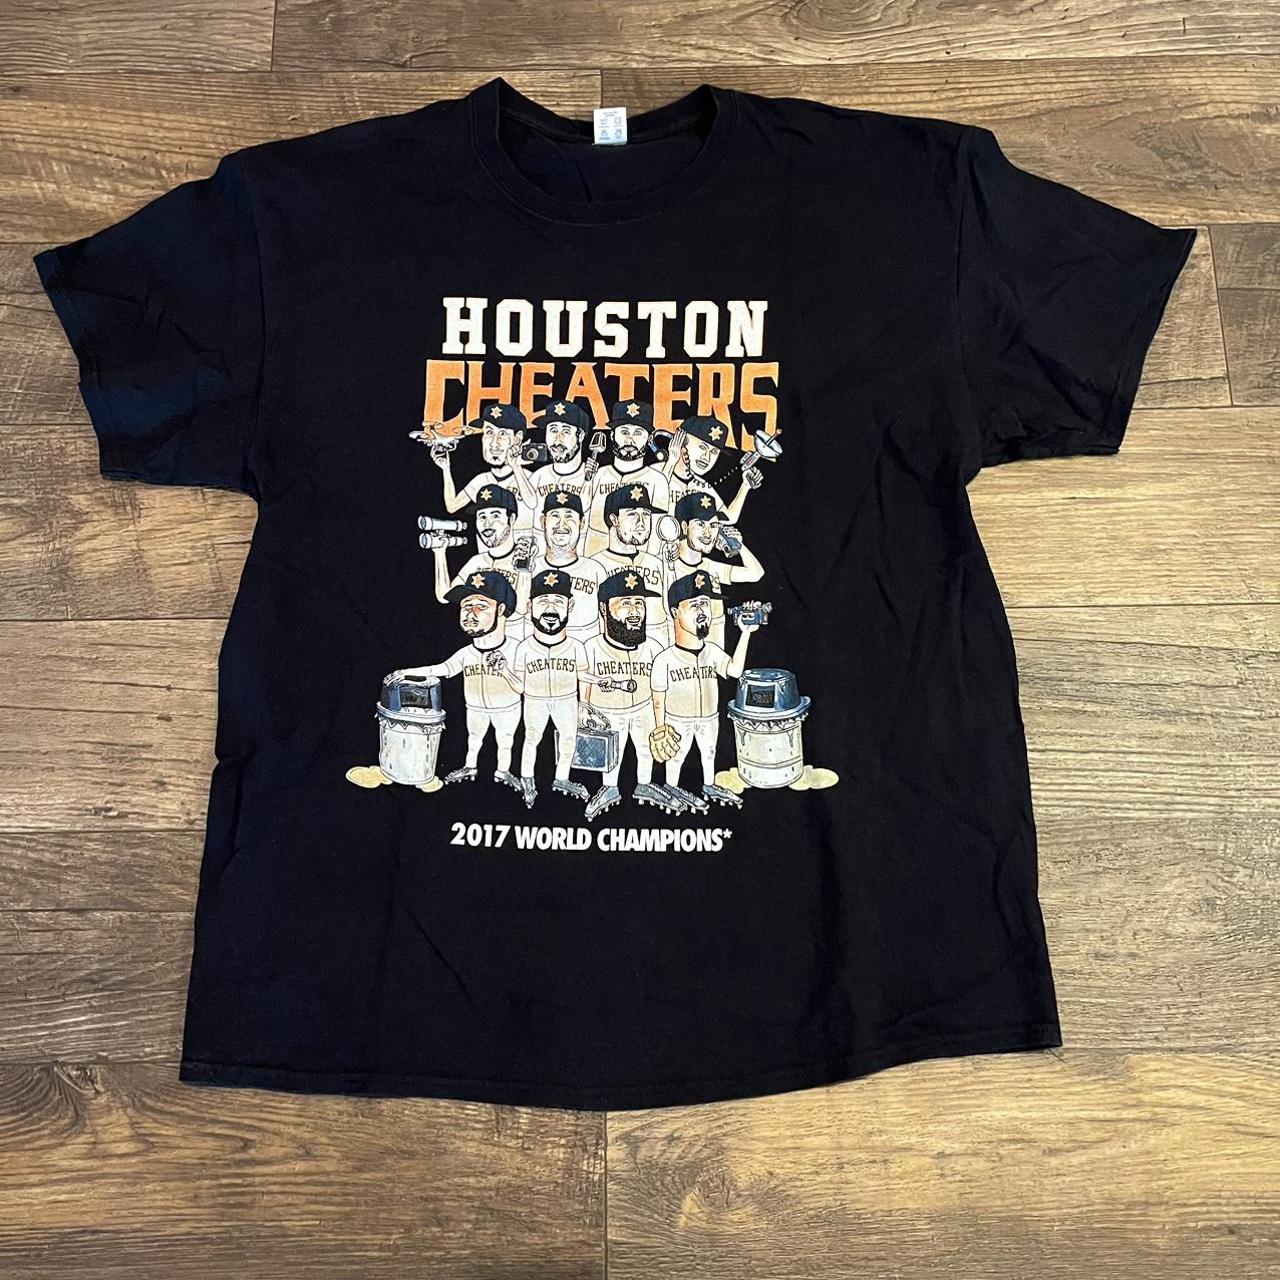 Super Clean Undefeated Streetwear Houston Astros